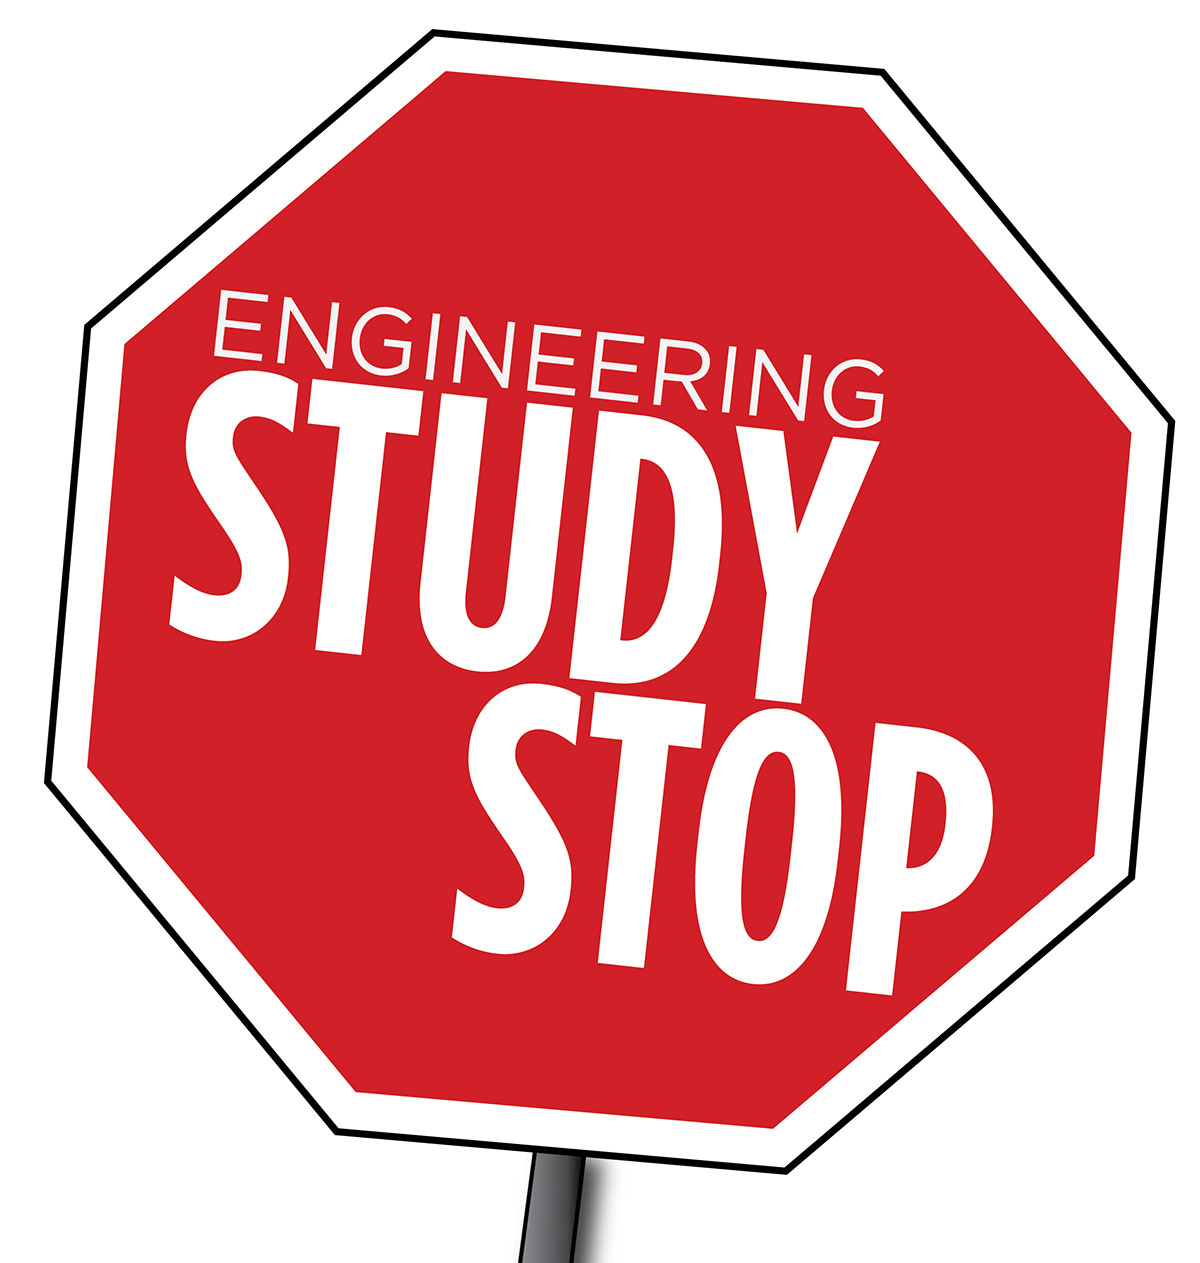 Study Stops will run on City and Scott campuses through April 26.